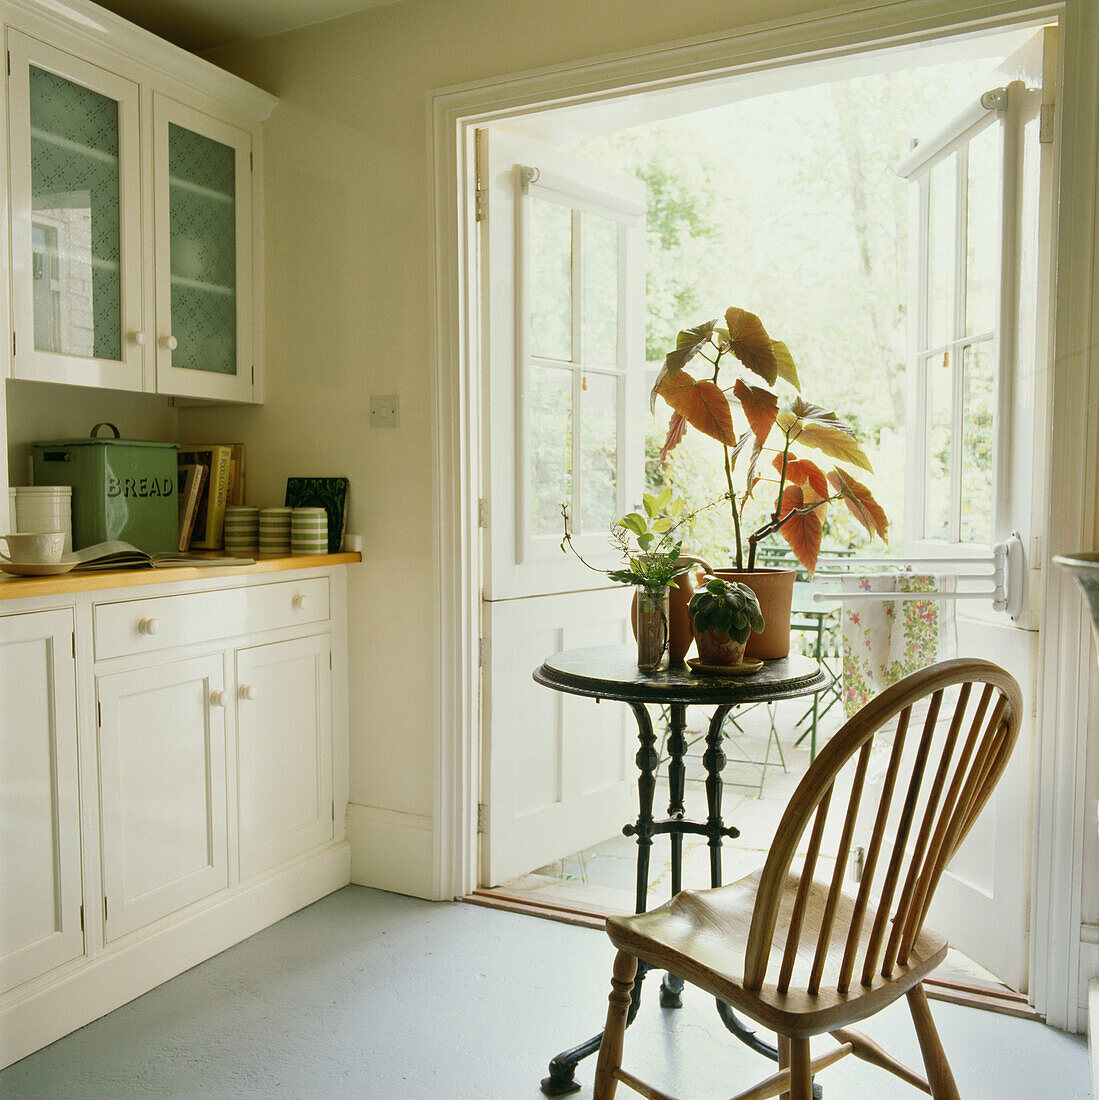 Country style painted wooden kitchen units with open stable door to garden